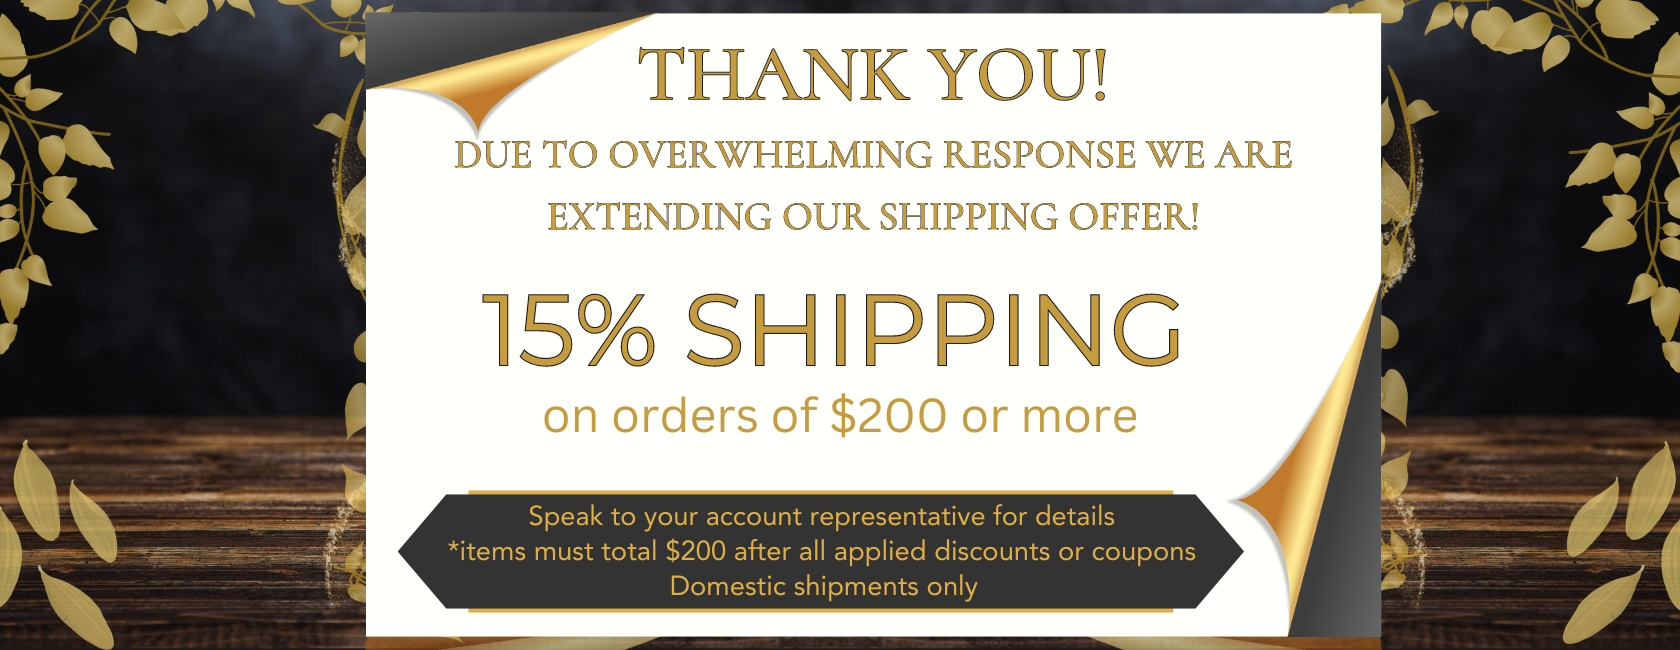 Shipping Extension No end Date